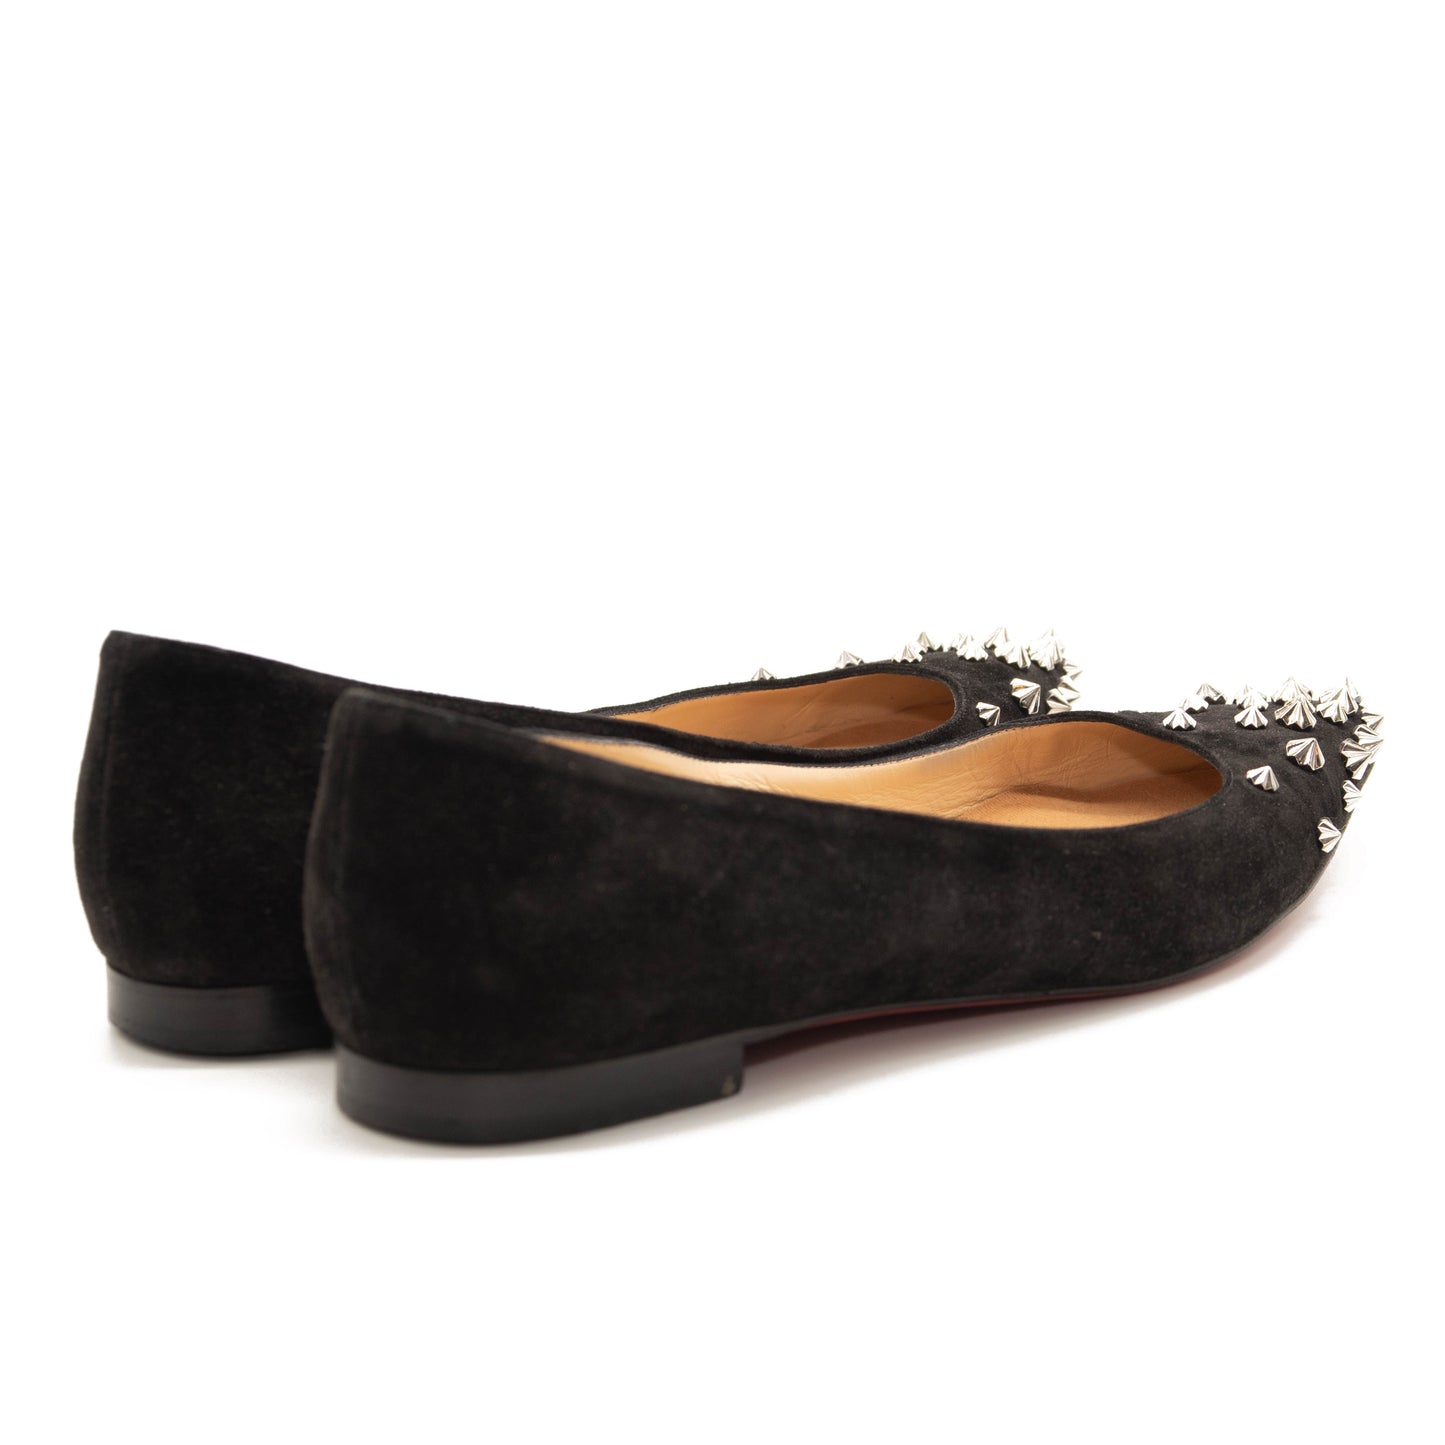 Christian Louboutin Drama Studded Suede Ballet Flats In Black 39